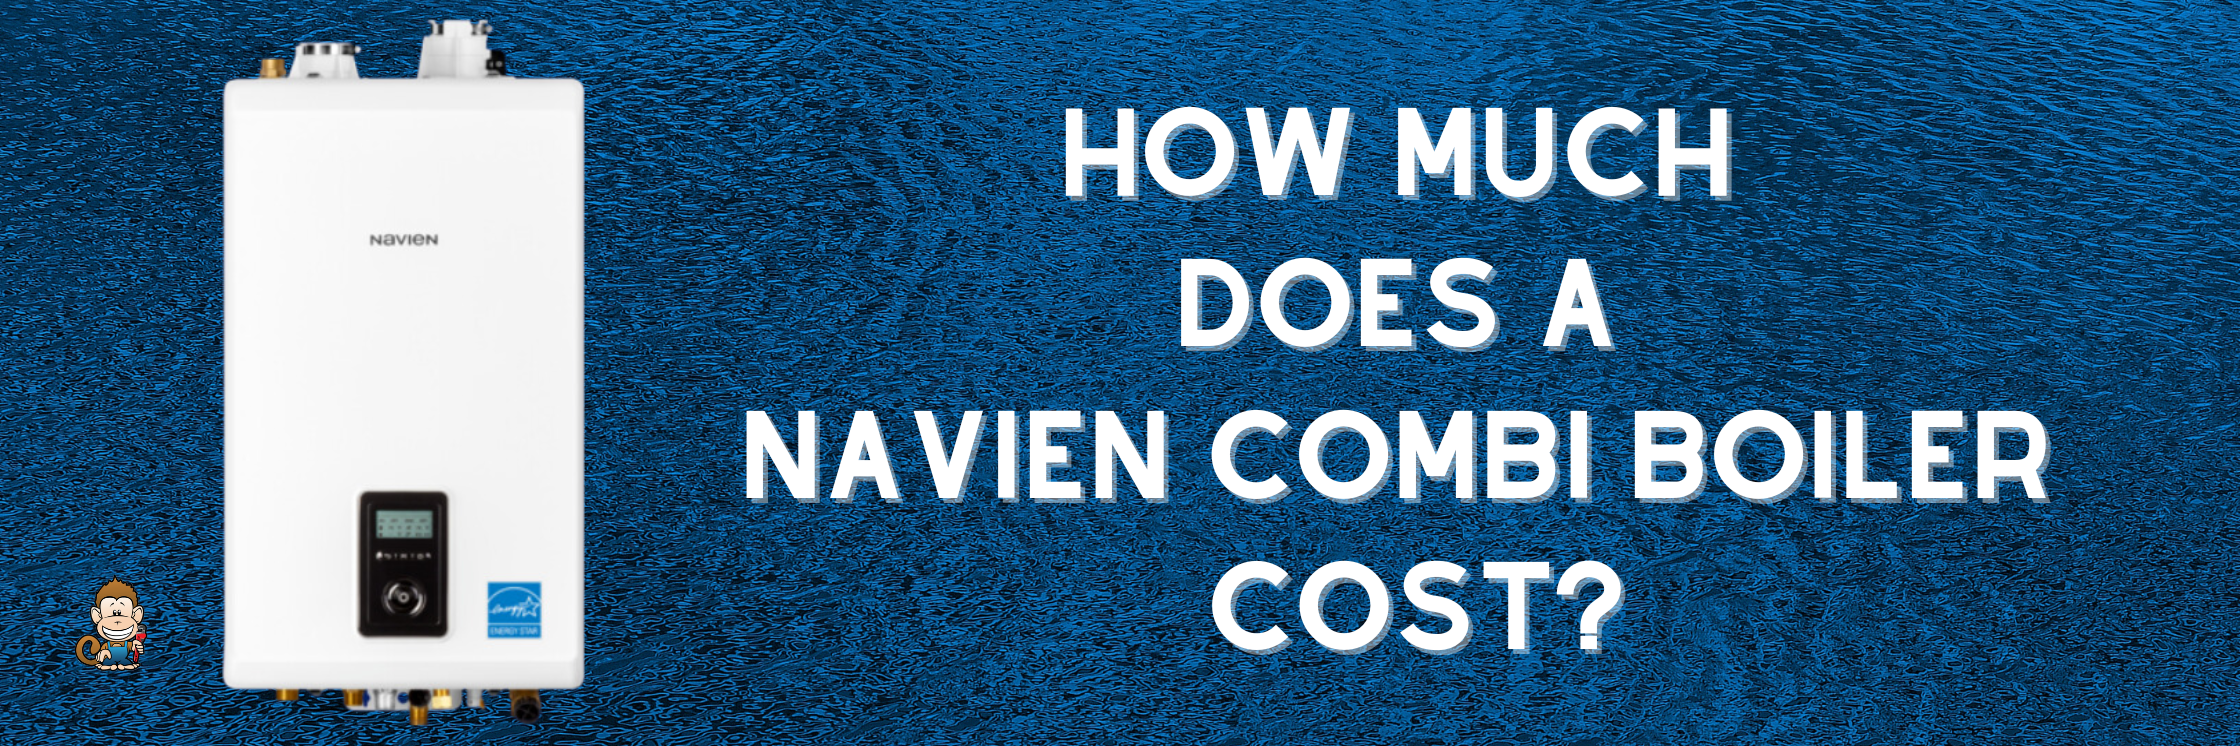 How Much Does a Navien Combi Boiler Cost?